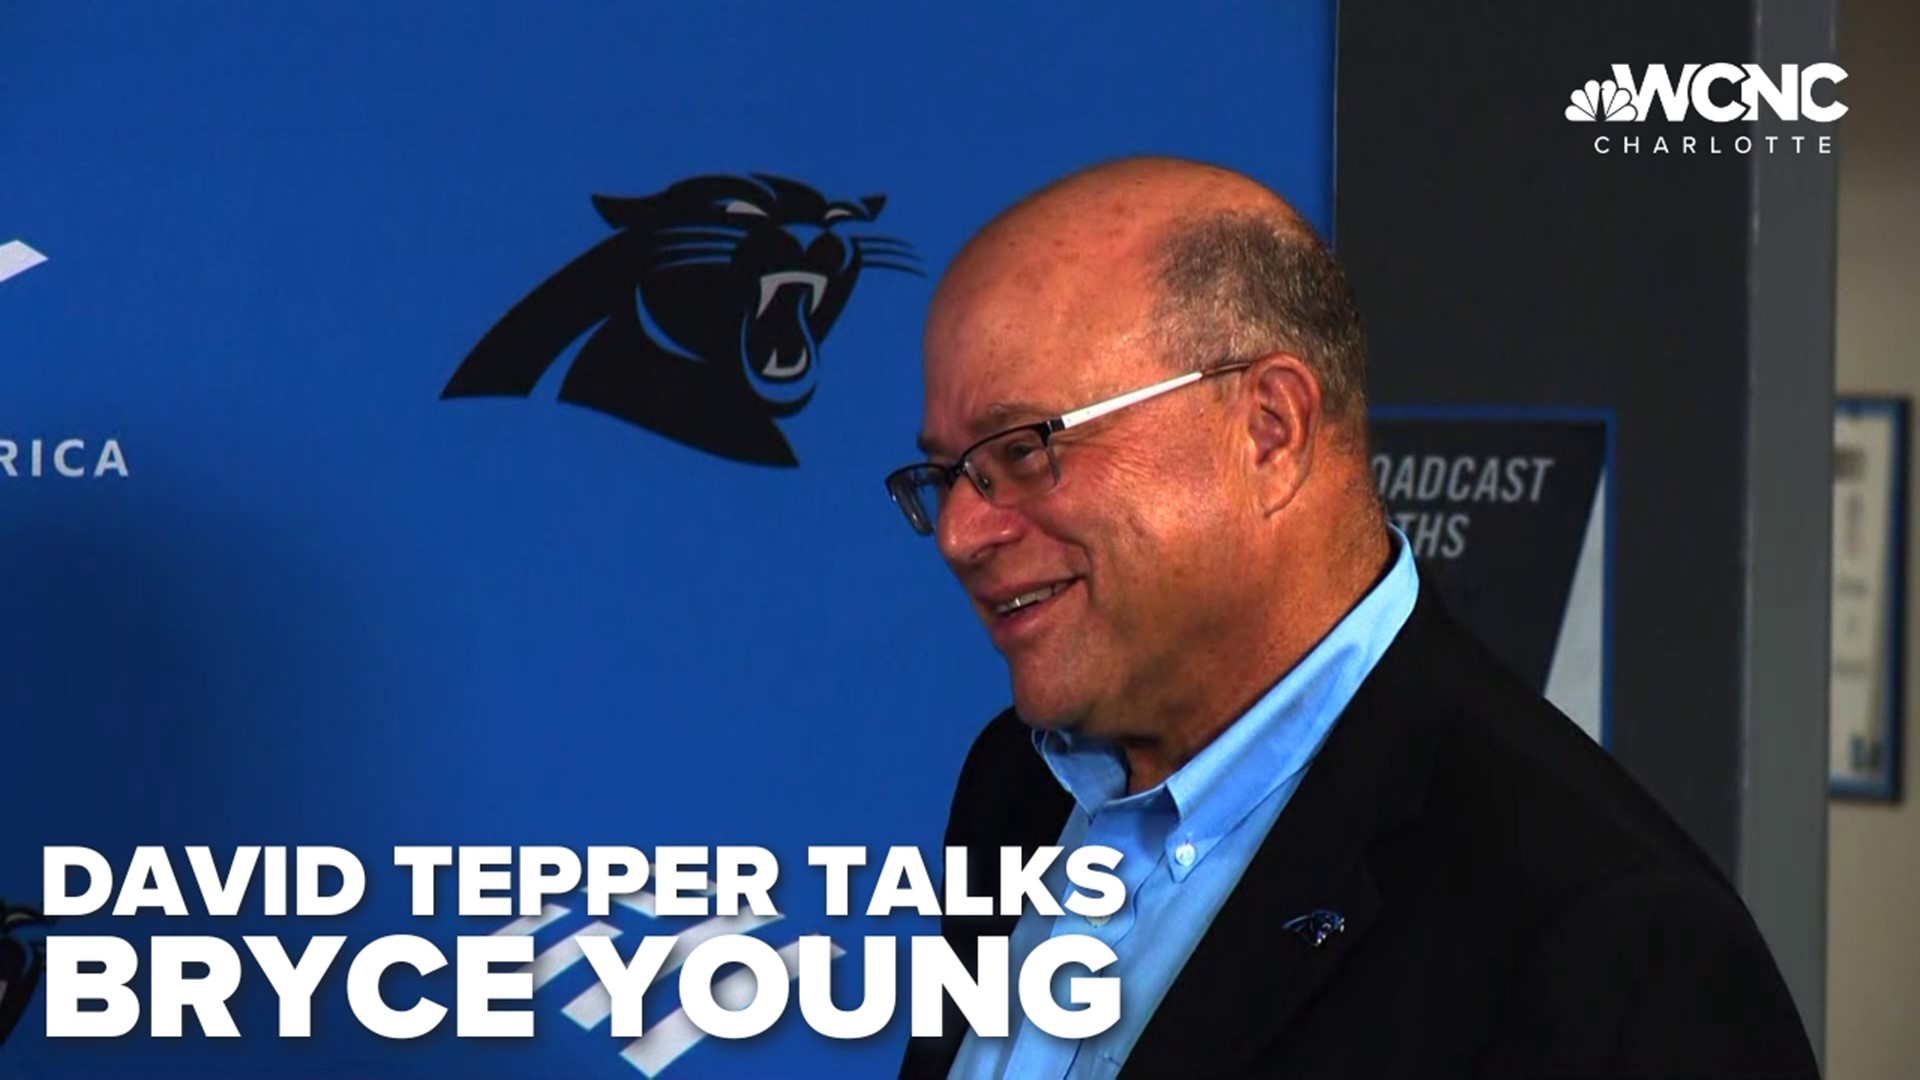 The team owner shared a little joke he made with Young to open the discussion on Thursday.